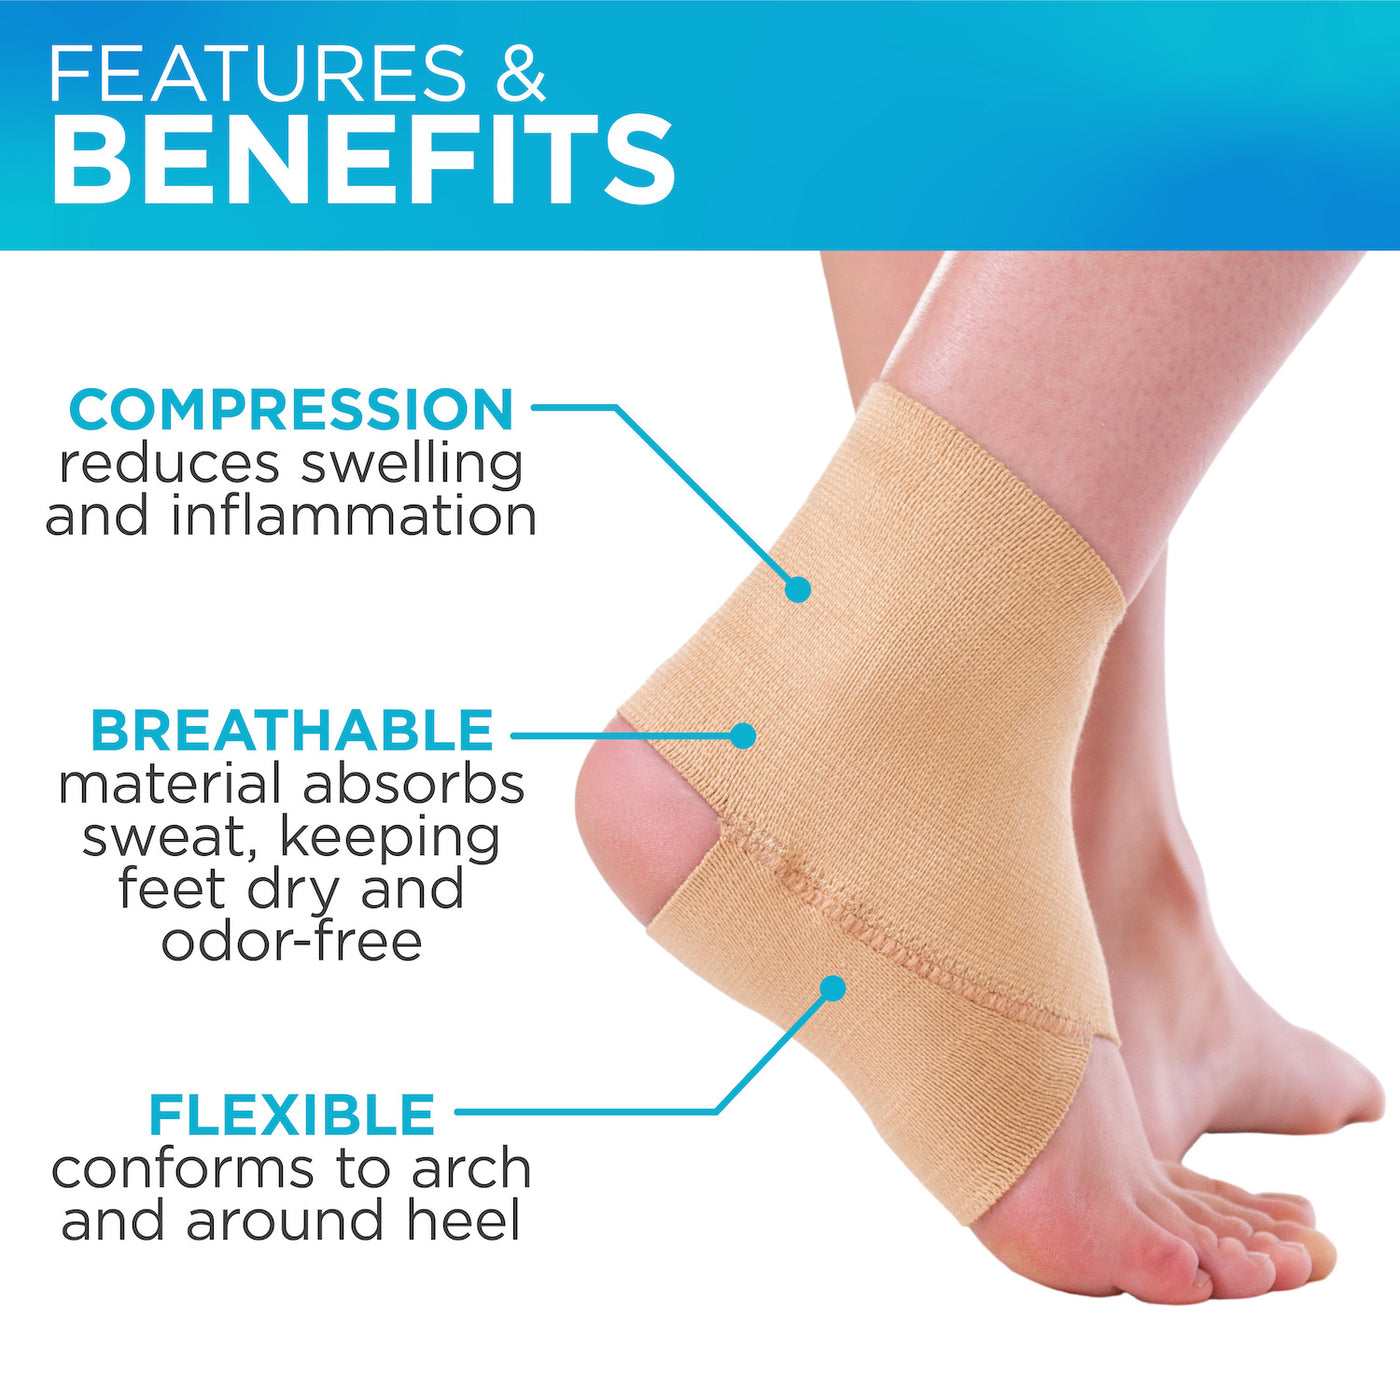 Tan ace ankle brace applies support around around weak ankles